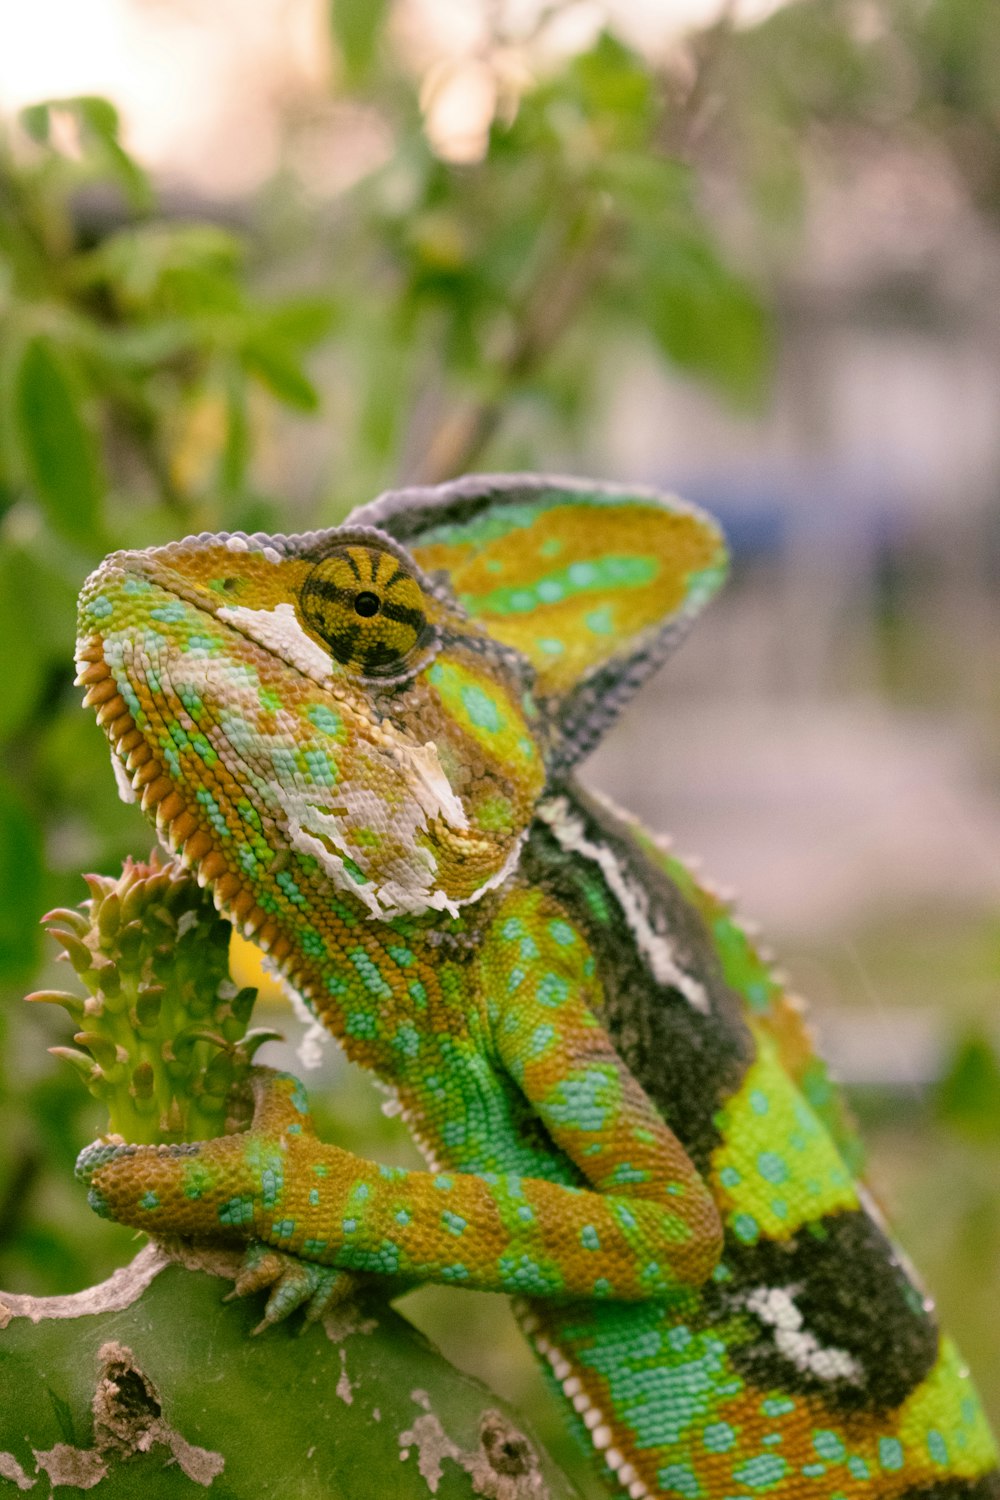 a close up of a lizard on a plant